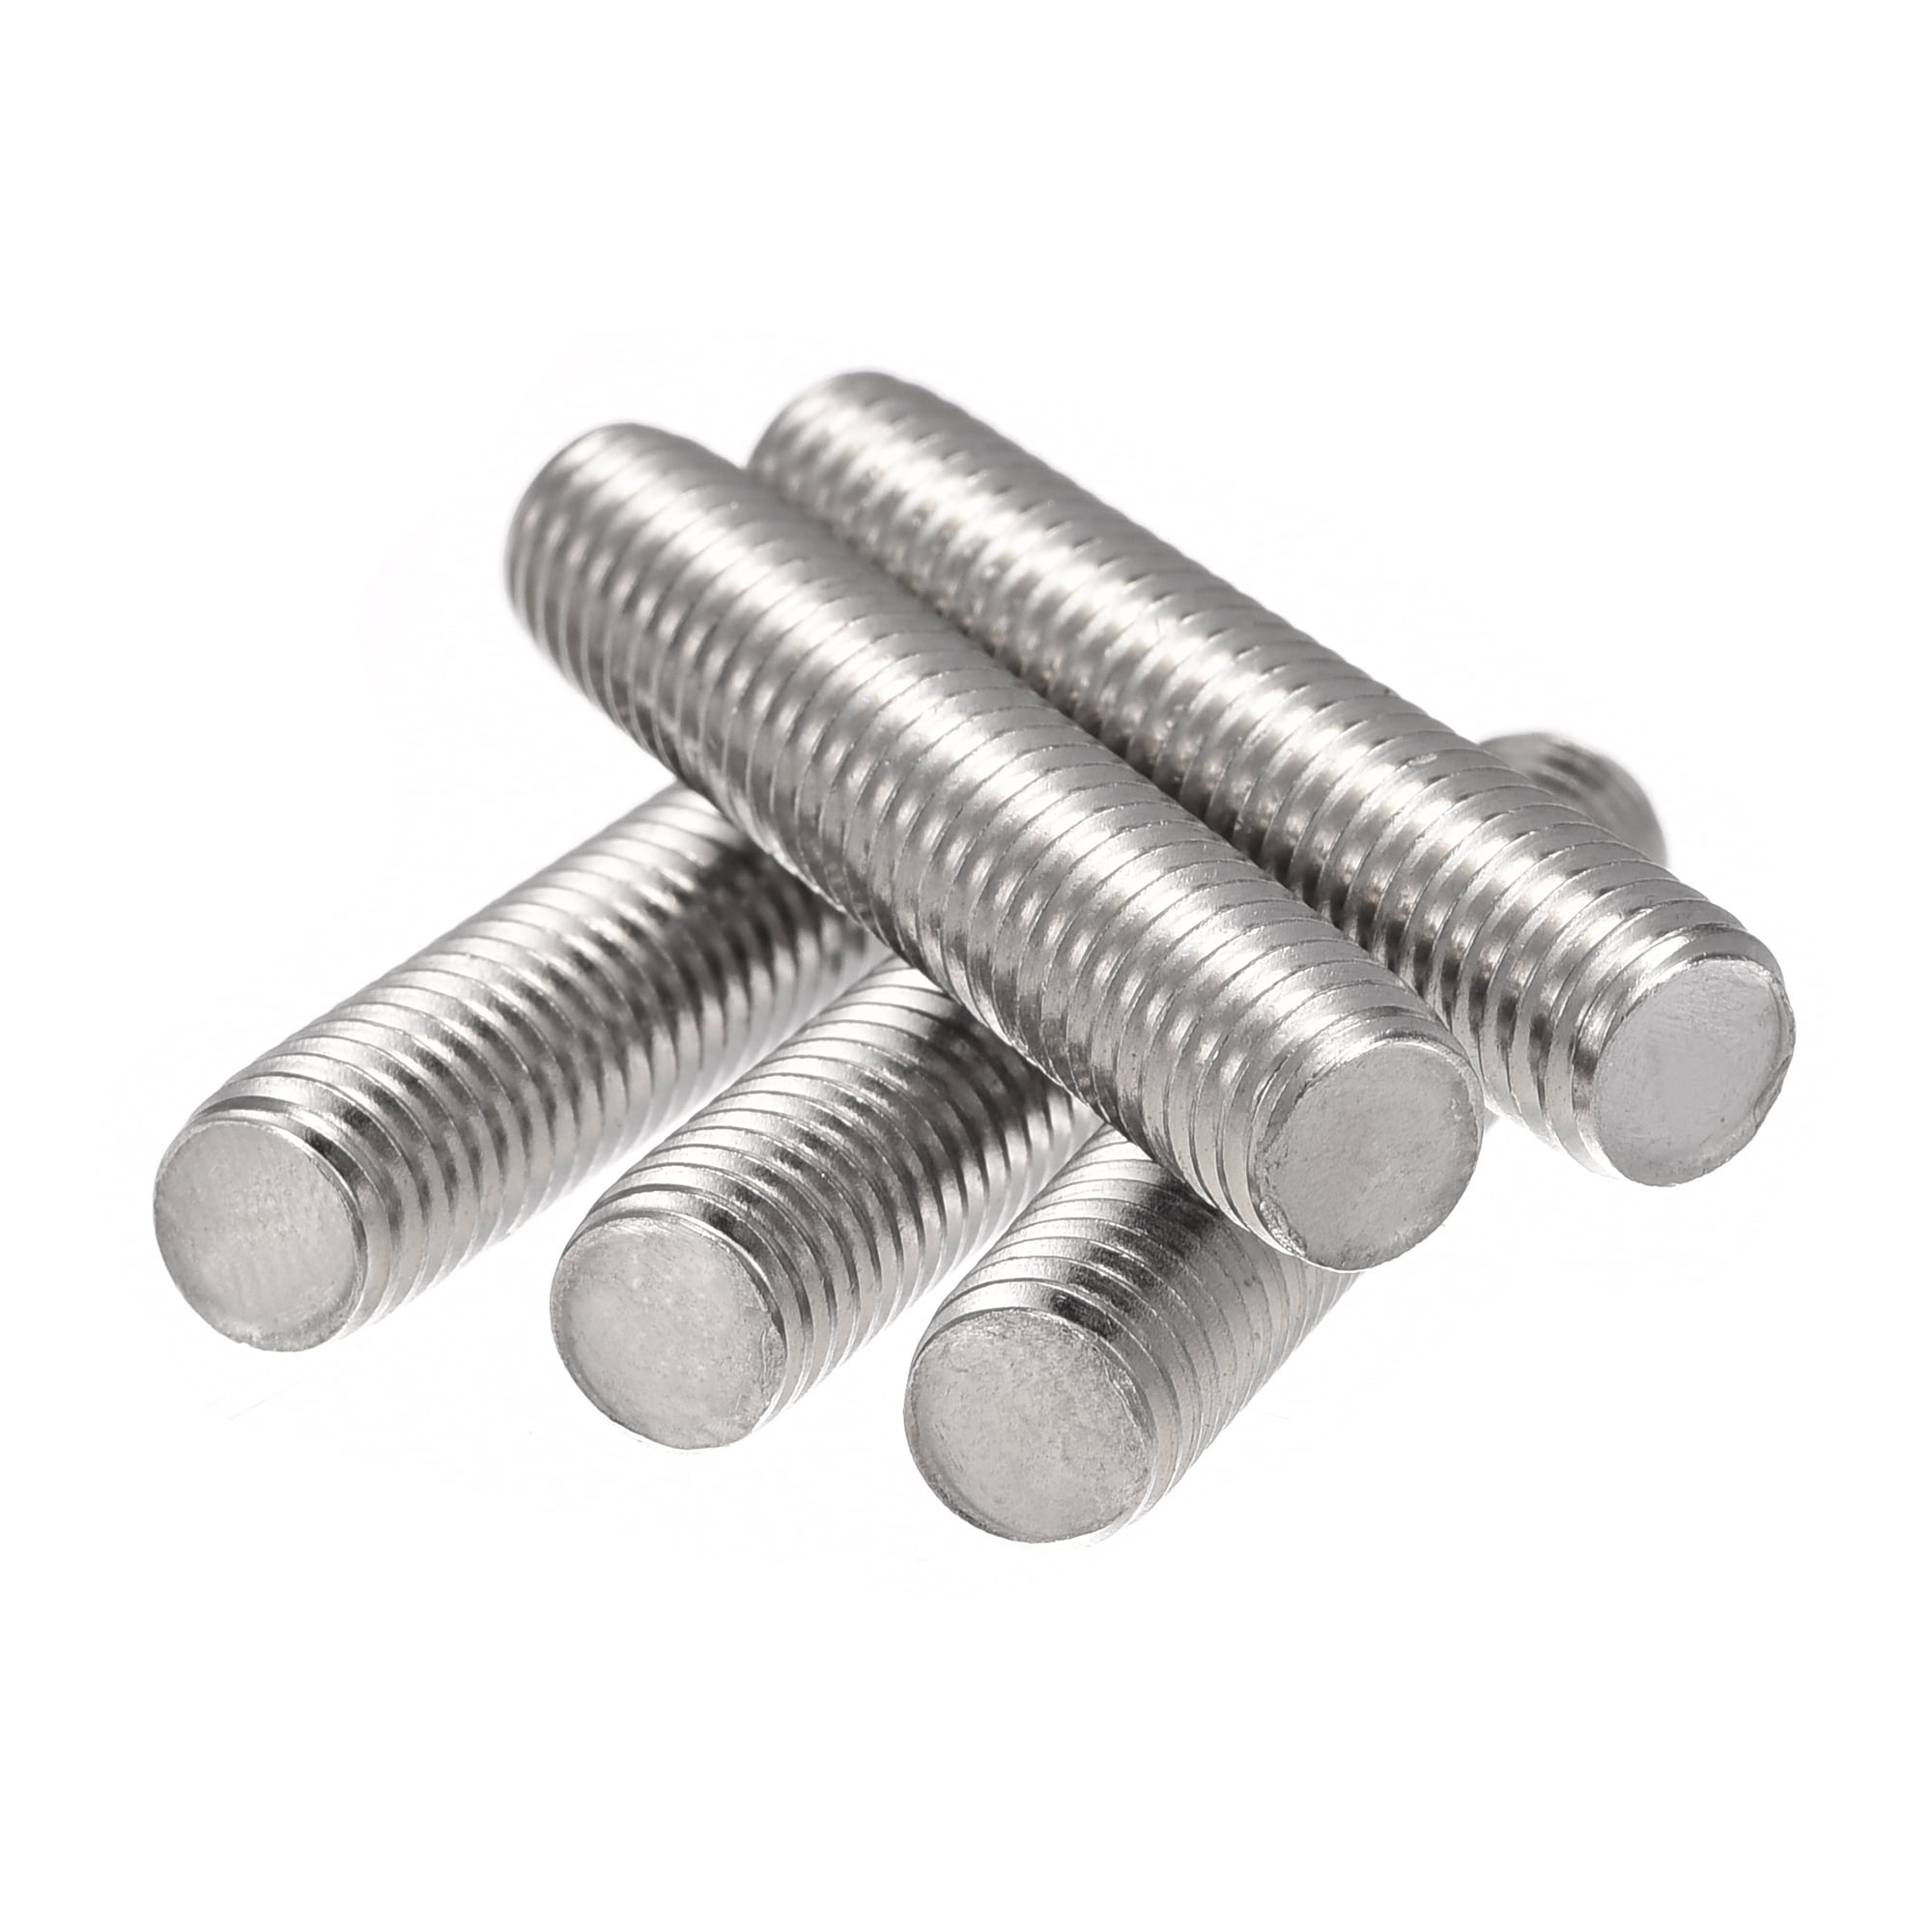 uxcell M10 Thread 40mm 304 Stainless Steel Hex Head Left Hand Screw Bolts Fastener